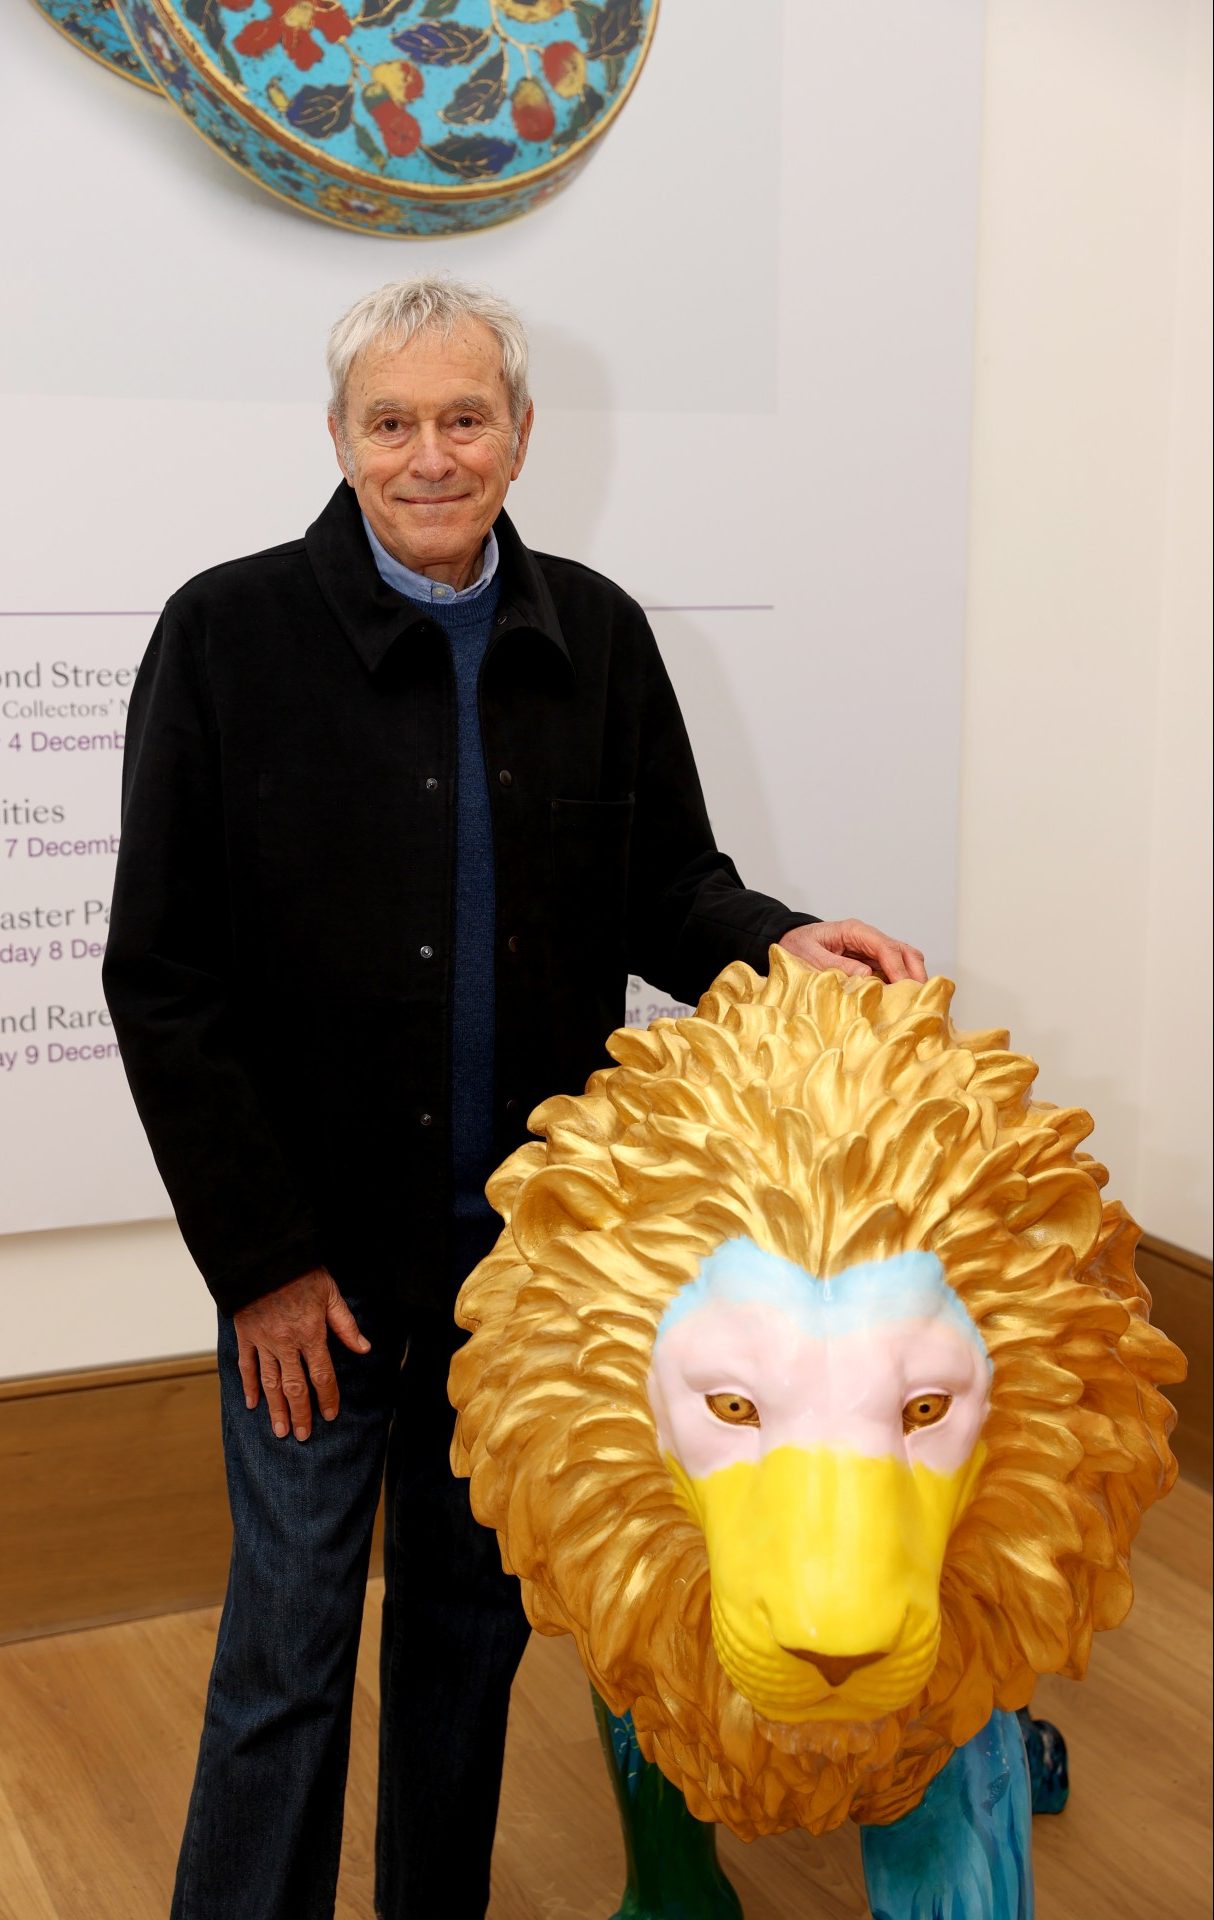 Author & Illustrator Michael Foreman with his lion (Photo by Chris Jackson/Getty Images for Tusk Trust)